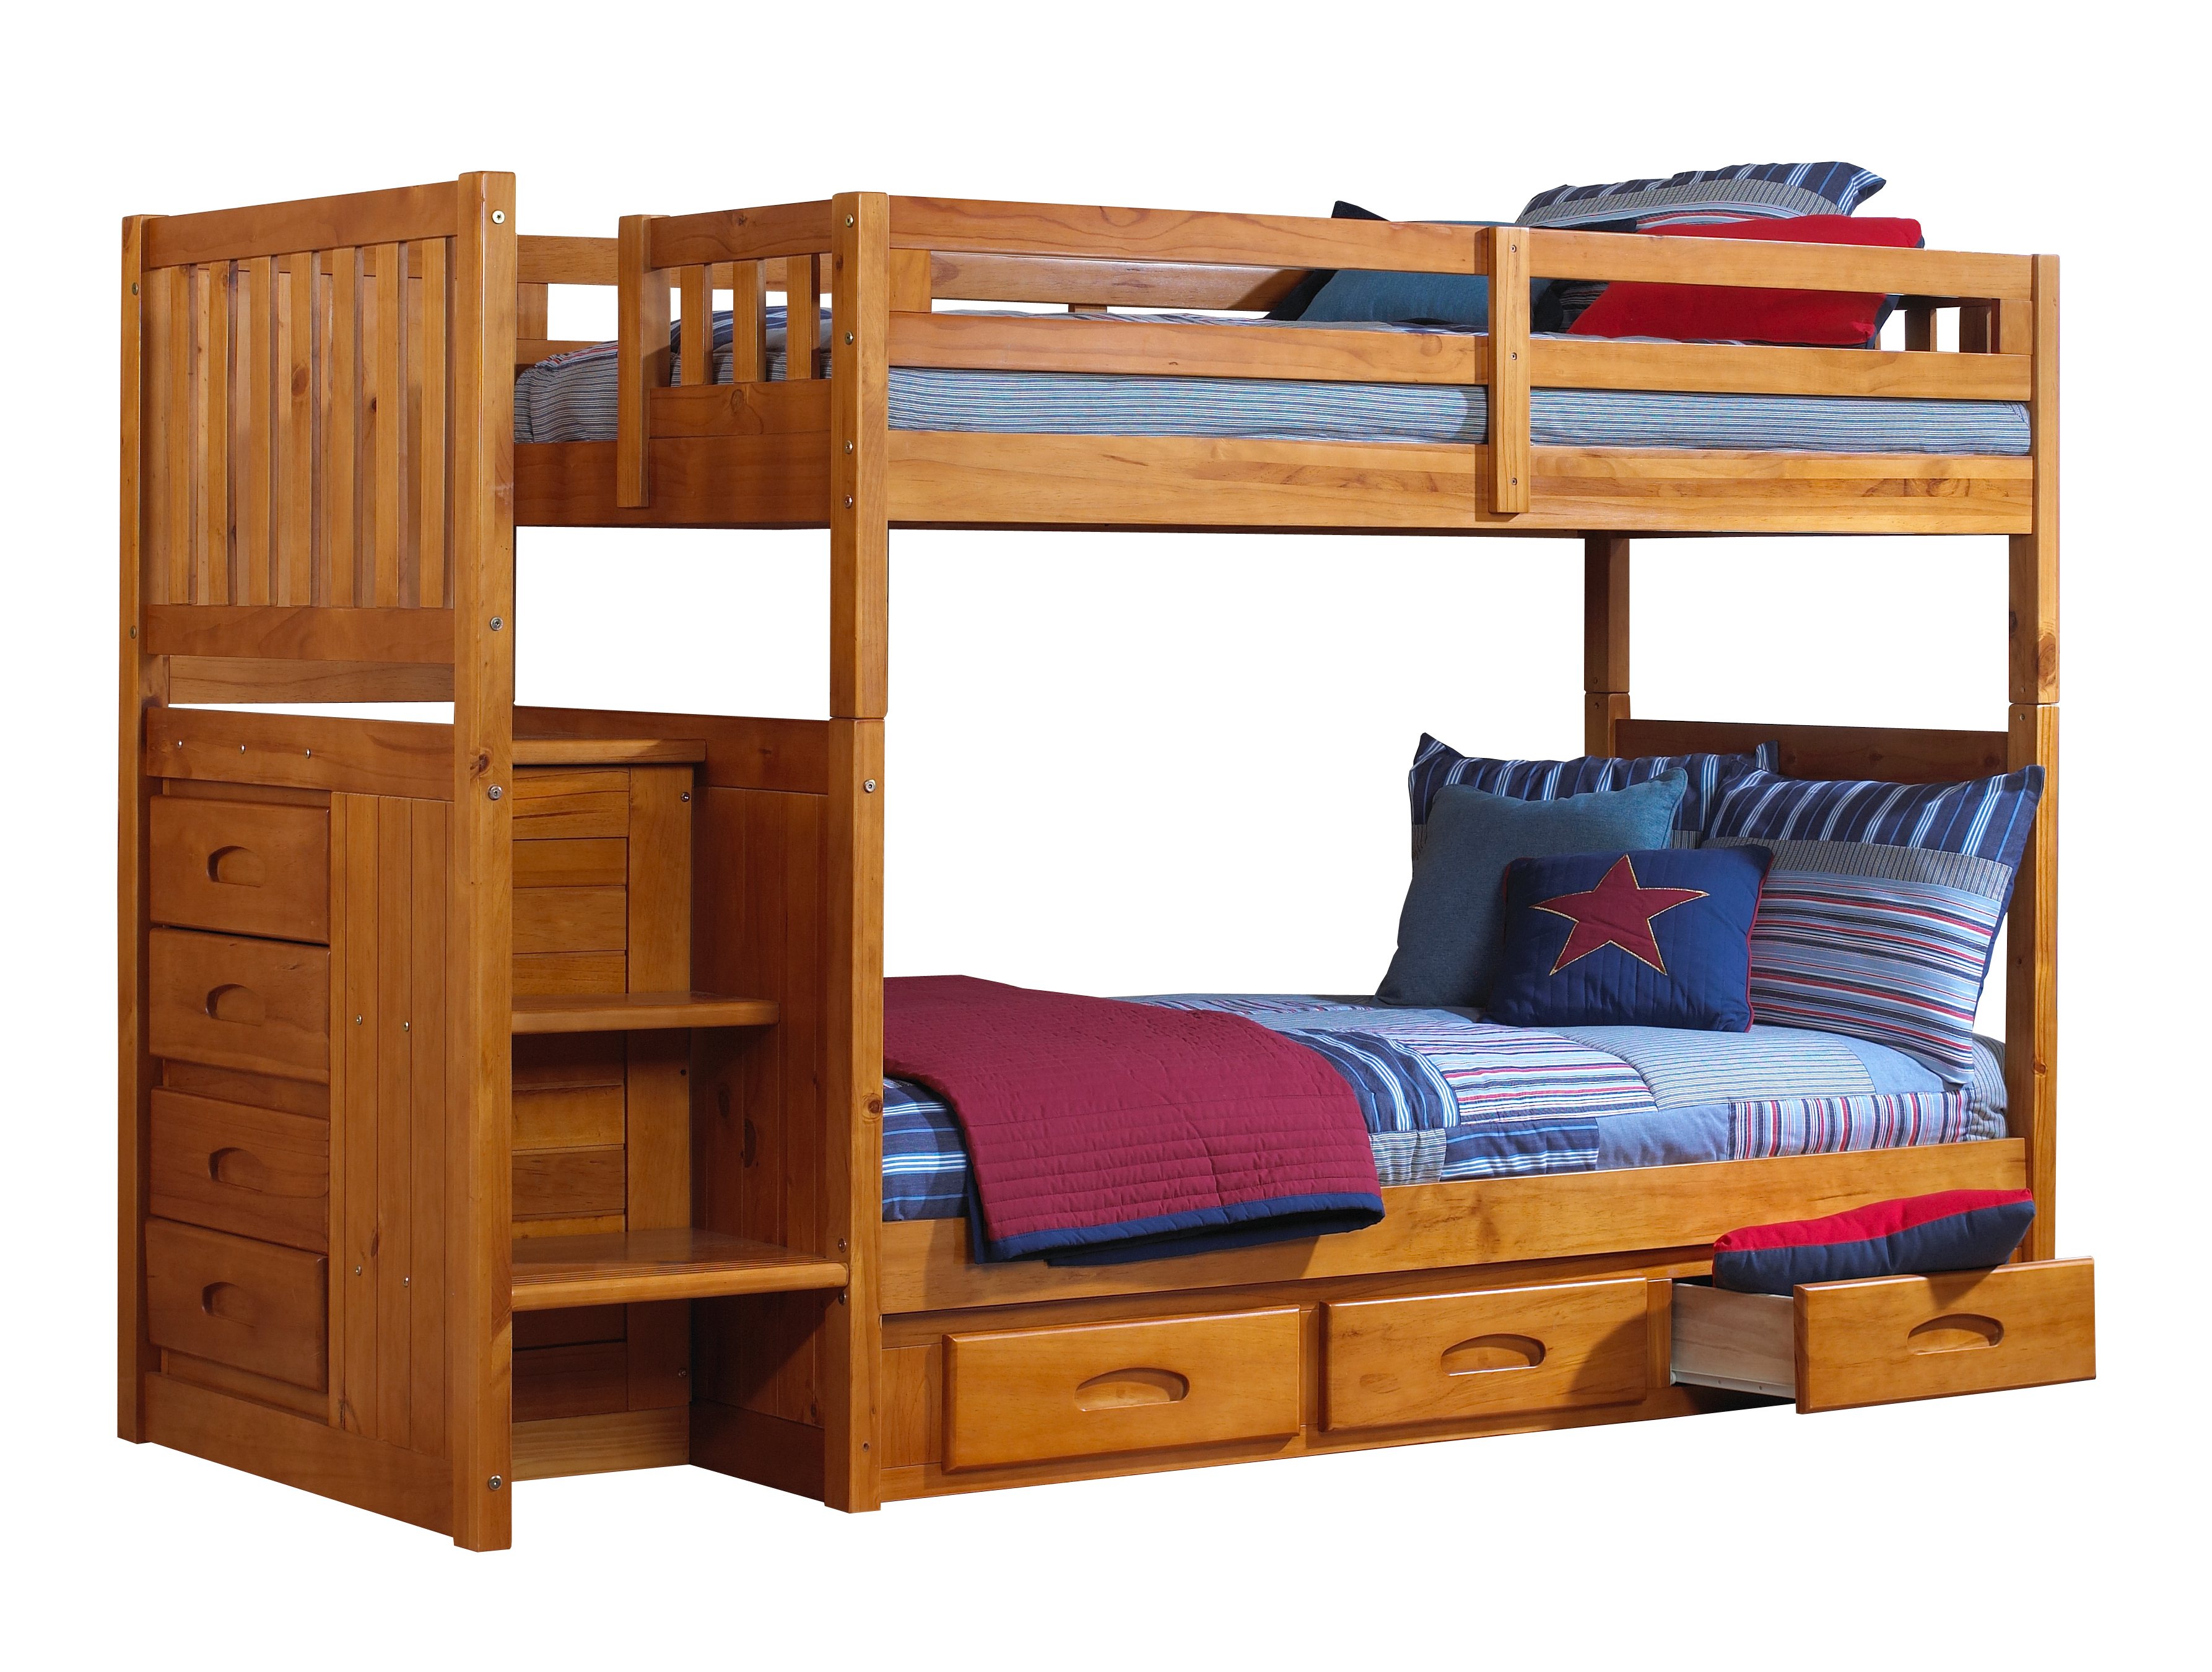 Twin Honey Mission Staircase Bunk Beds, Unique Bunk Beds With Storage